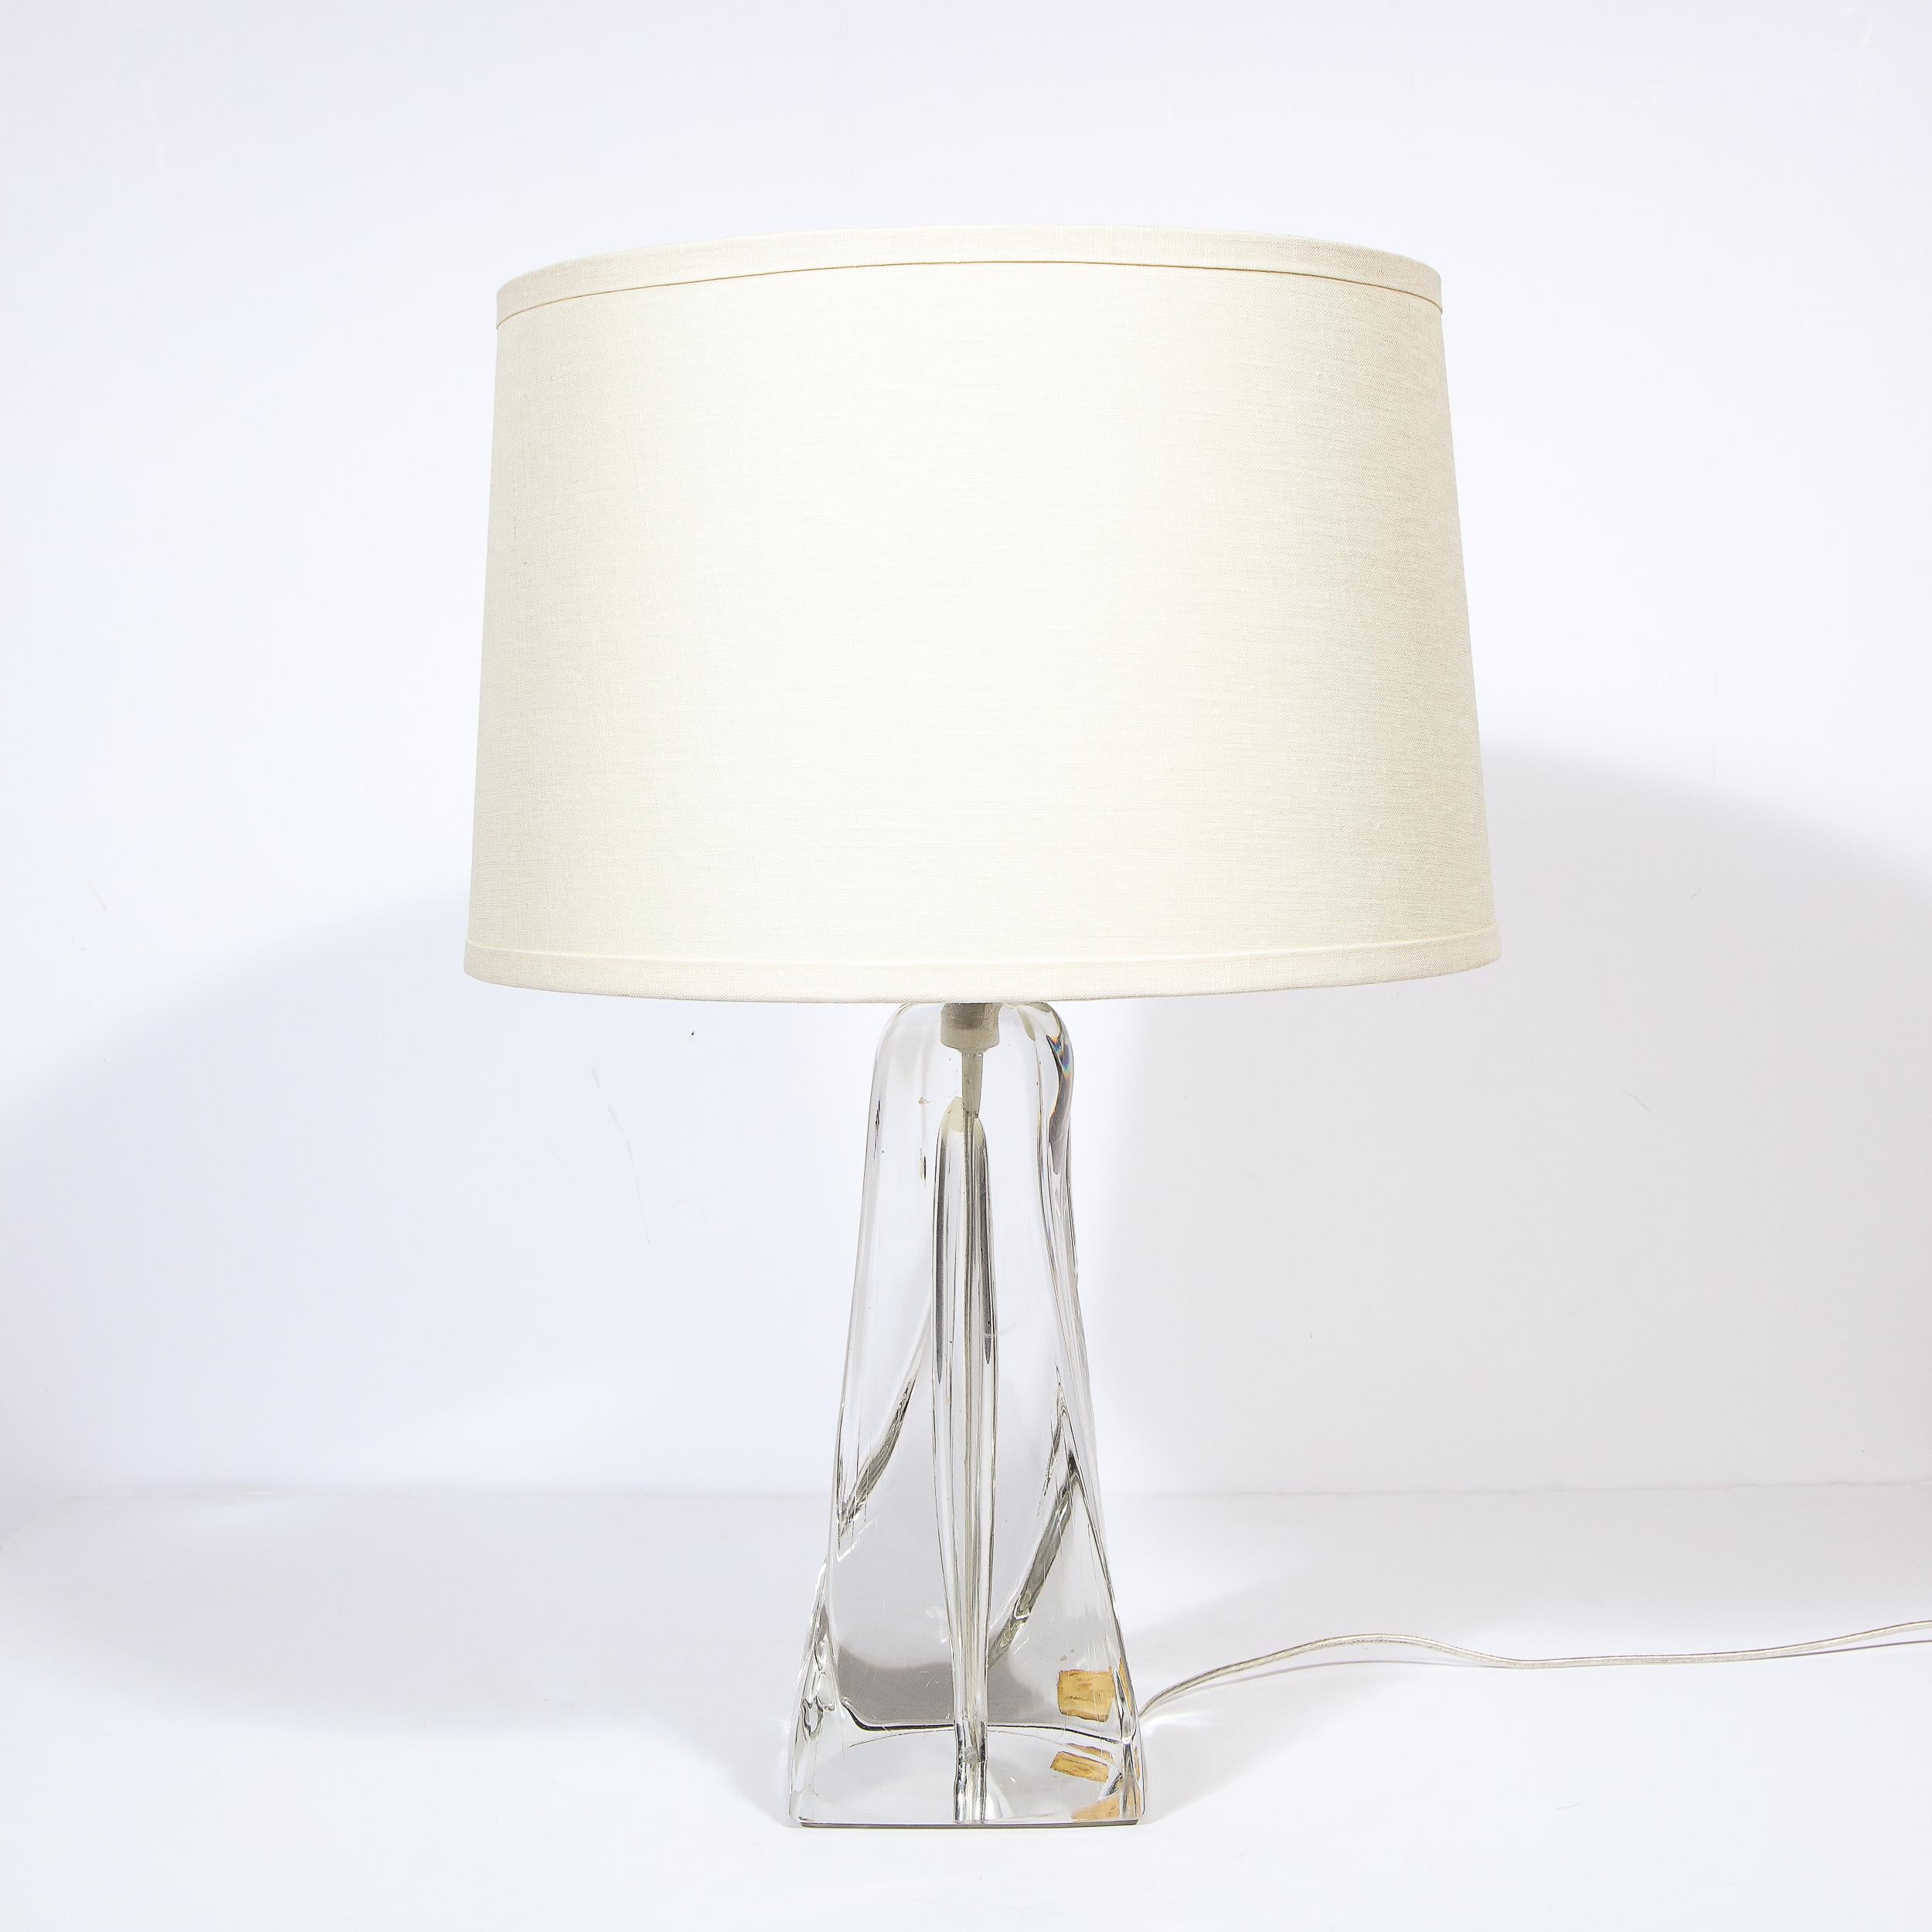 This stunning and sculptural Mid-Century Modern table lamp was realized by the legendary atelier of Daum, circa 1960, in the town of Nancy, France. The piece features an abstracted, amorphic conical form with a wealth of rivulets and rounded